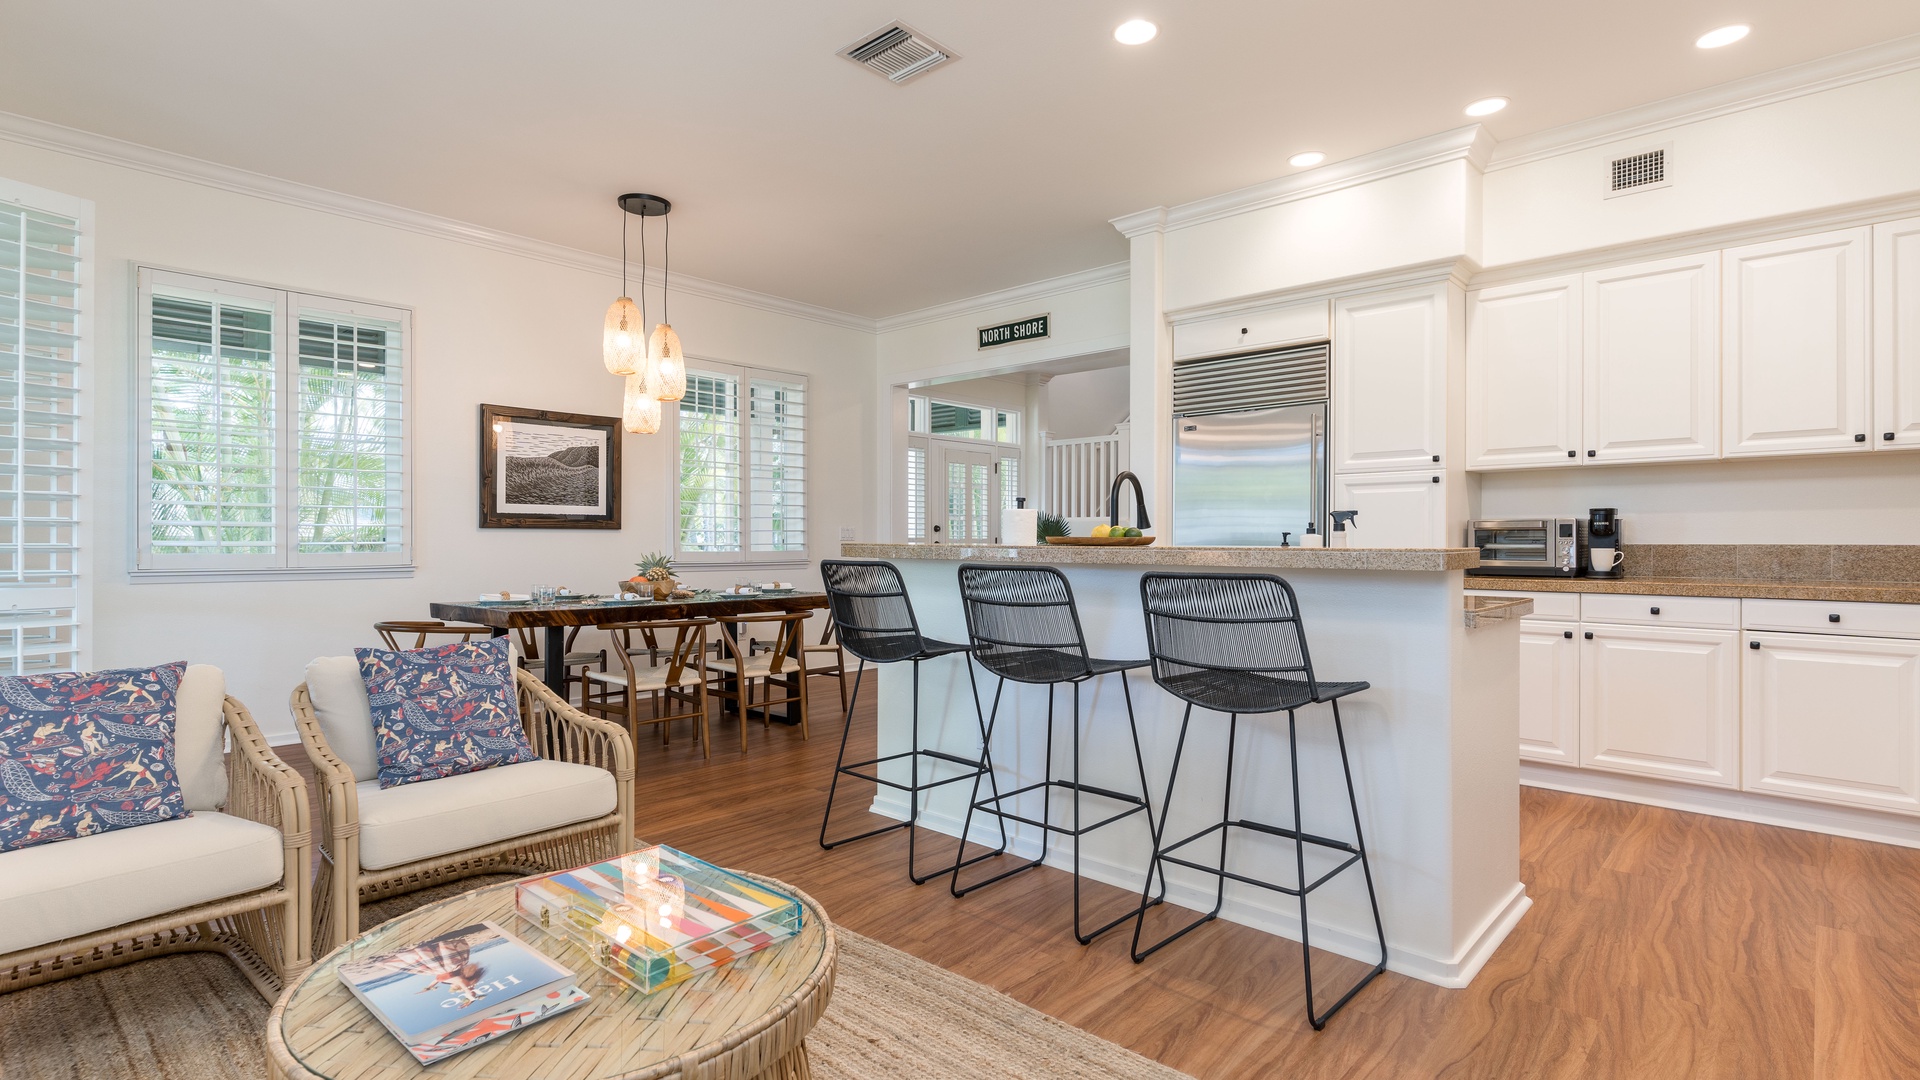 Kapolei Vacation Rentals, Coconut Plantation 1136-4 - The beautiful kitchen with bar seating.